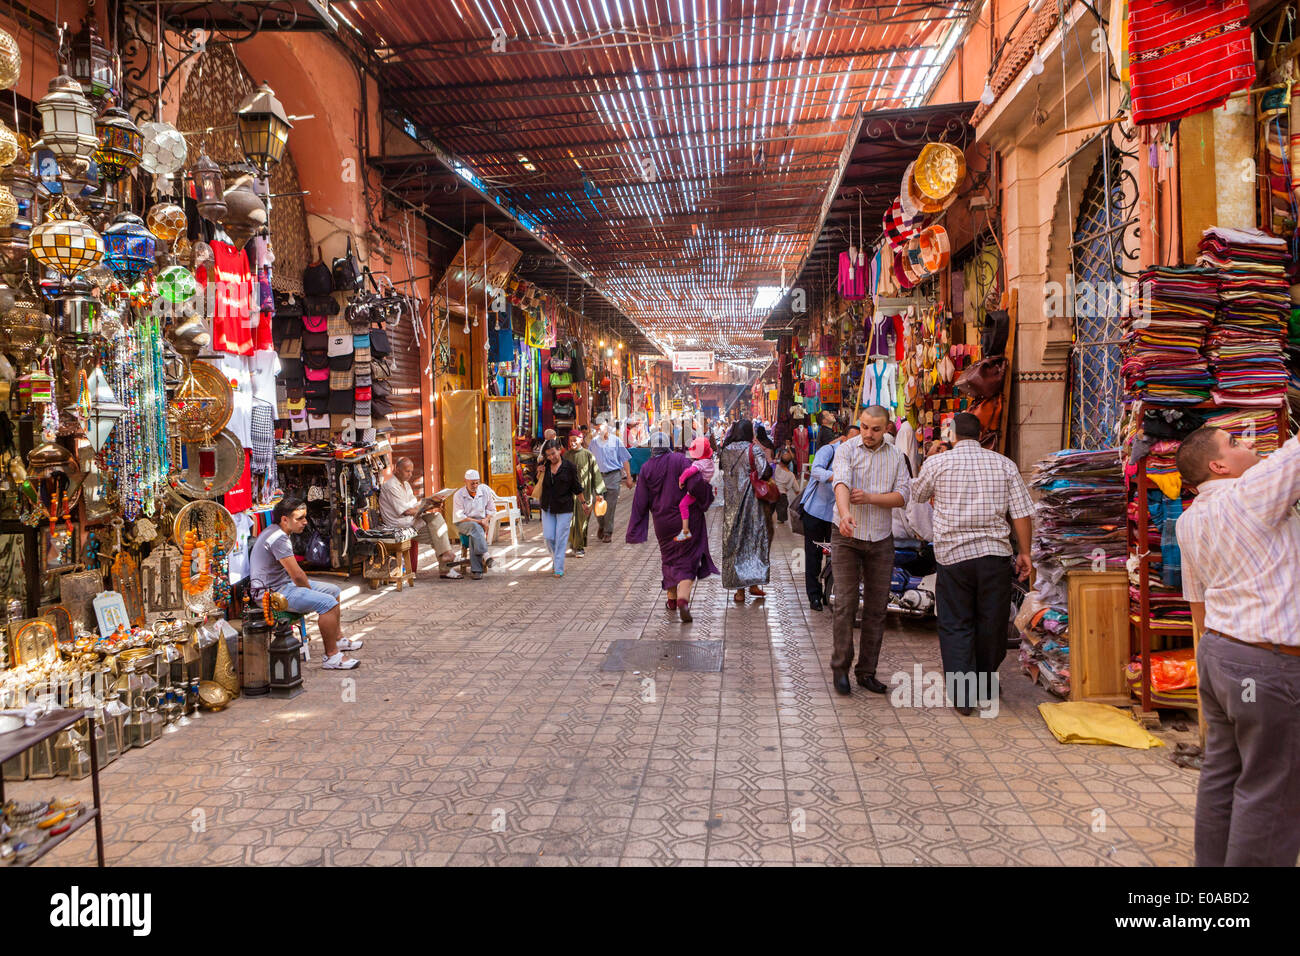 Shops in the souk, Medina, Marrakech, Morocco, North Africa. Stock Photo